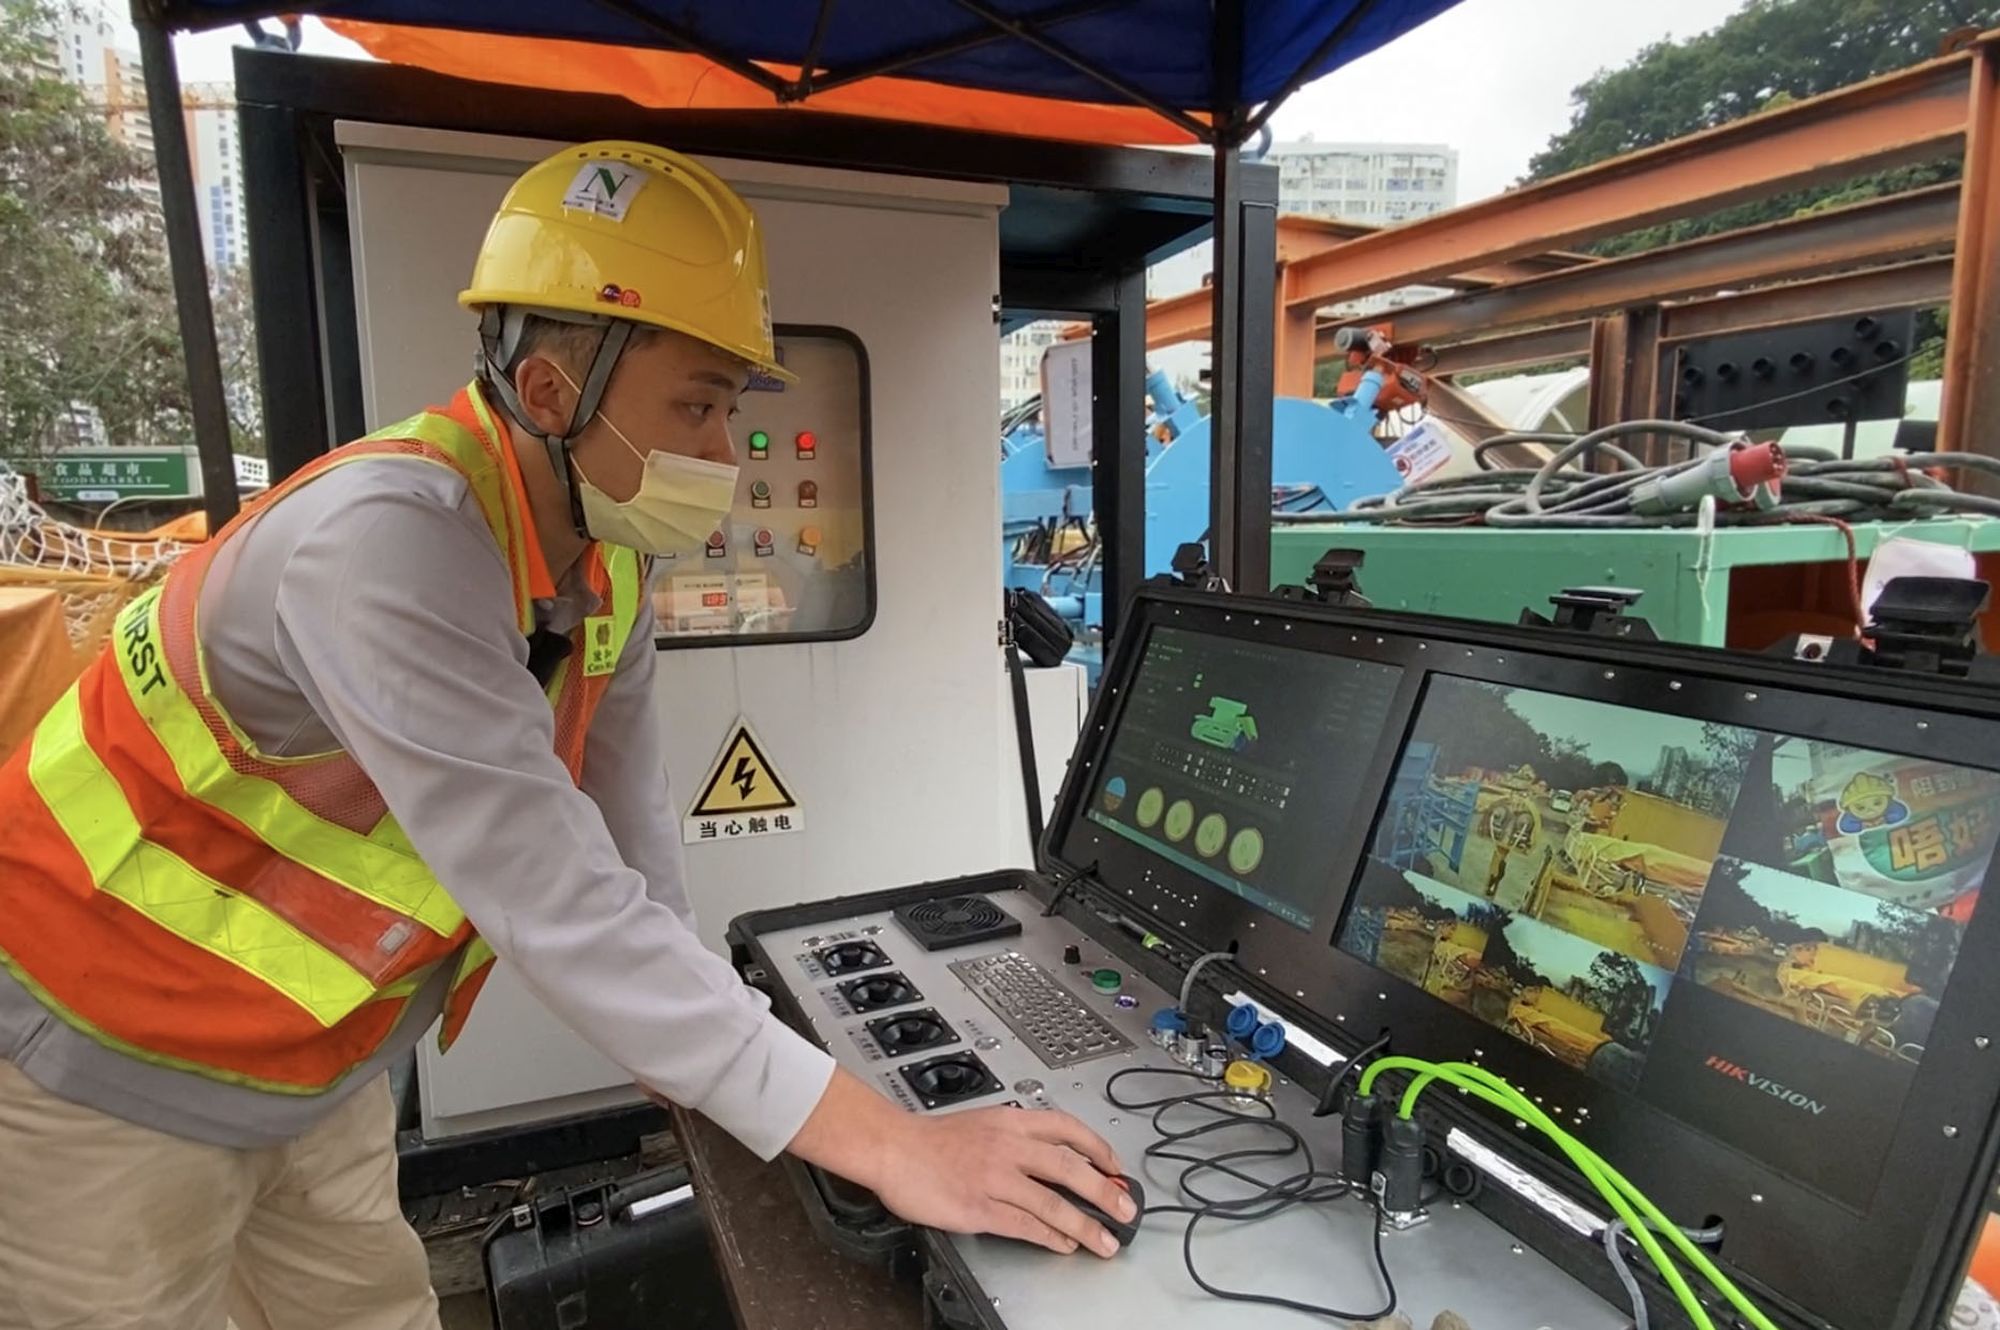 Technicians can grasp the situation inside the pipes using real-time cameras at the ground level and control the three robots to conduct desilting and connect the pipes.